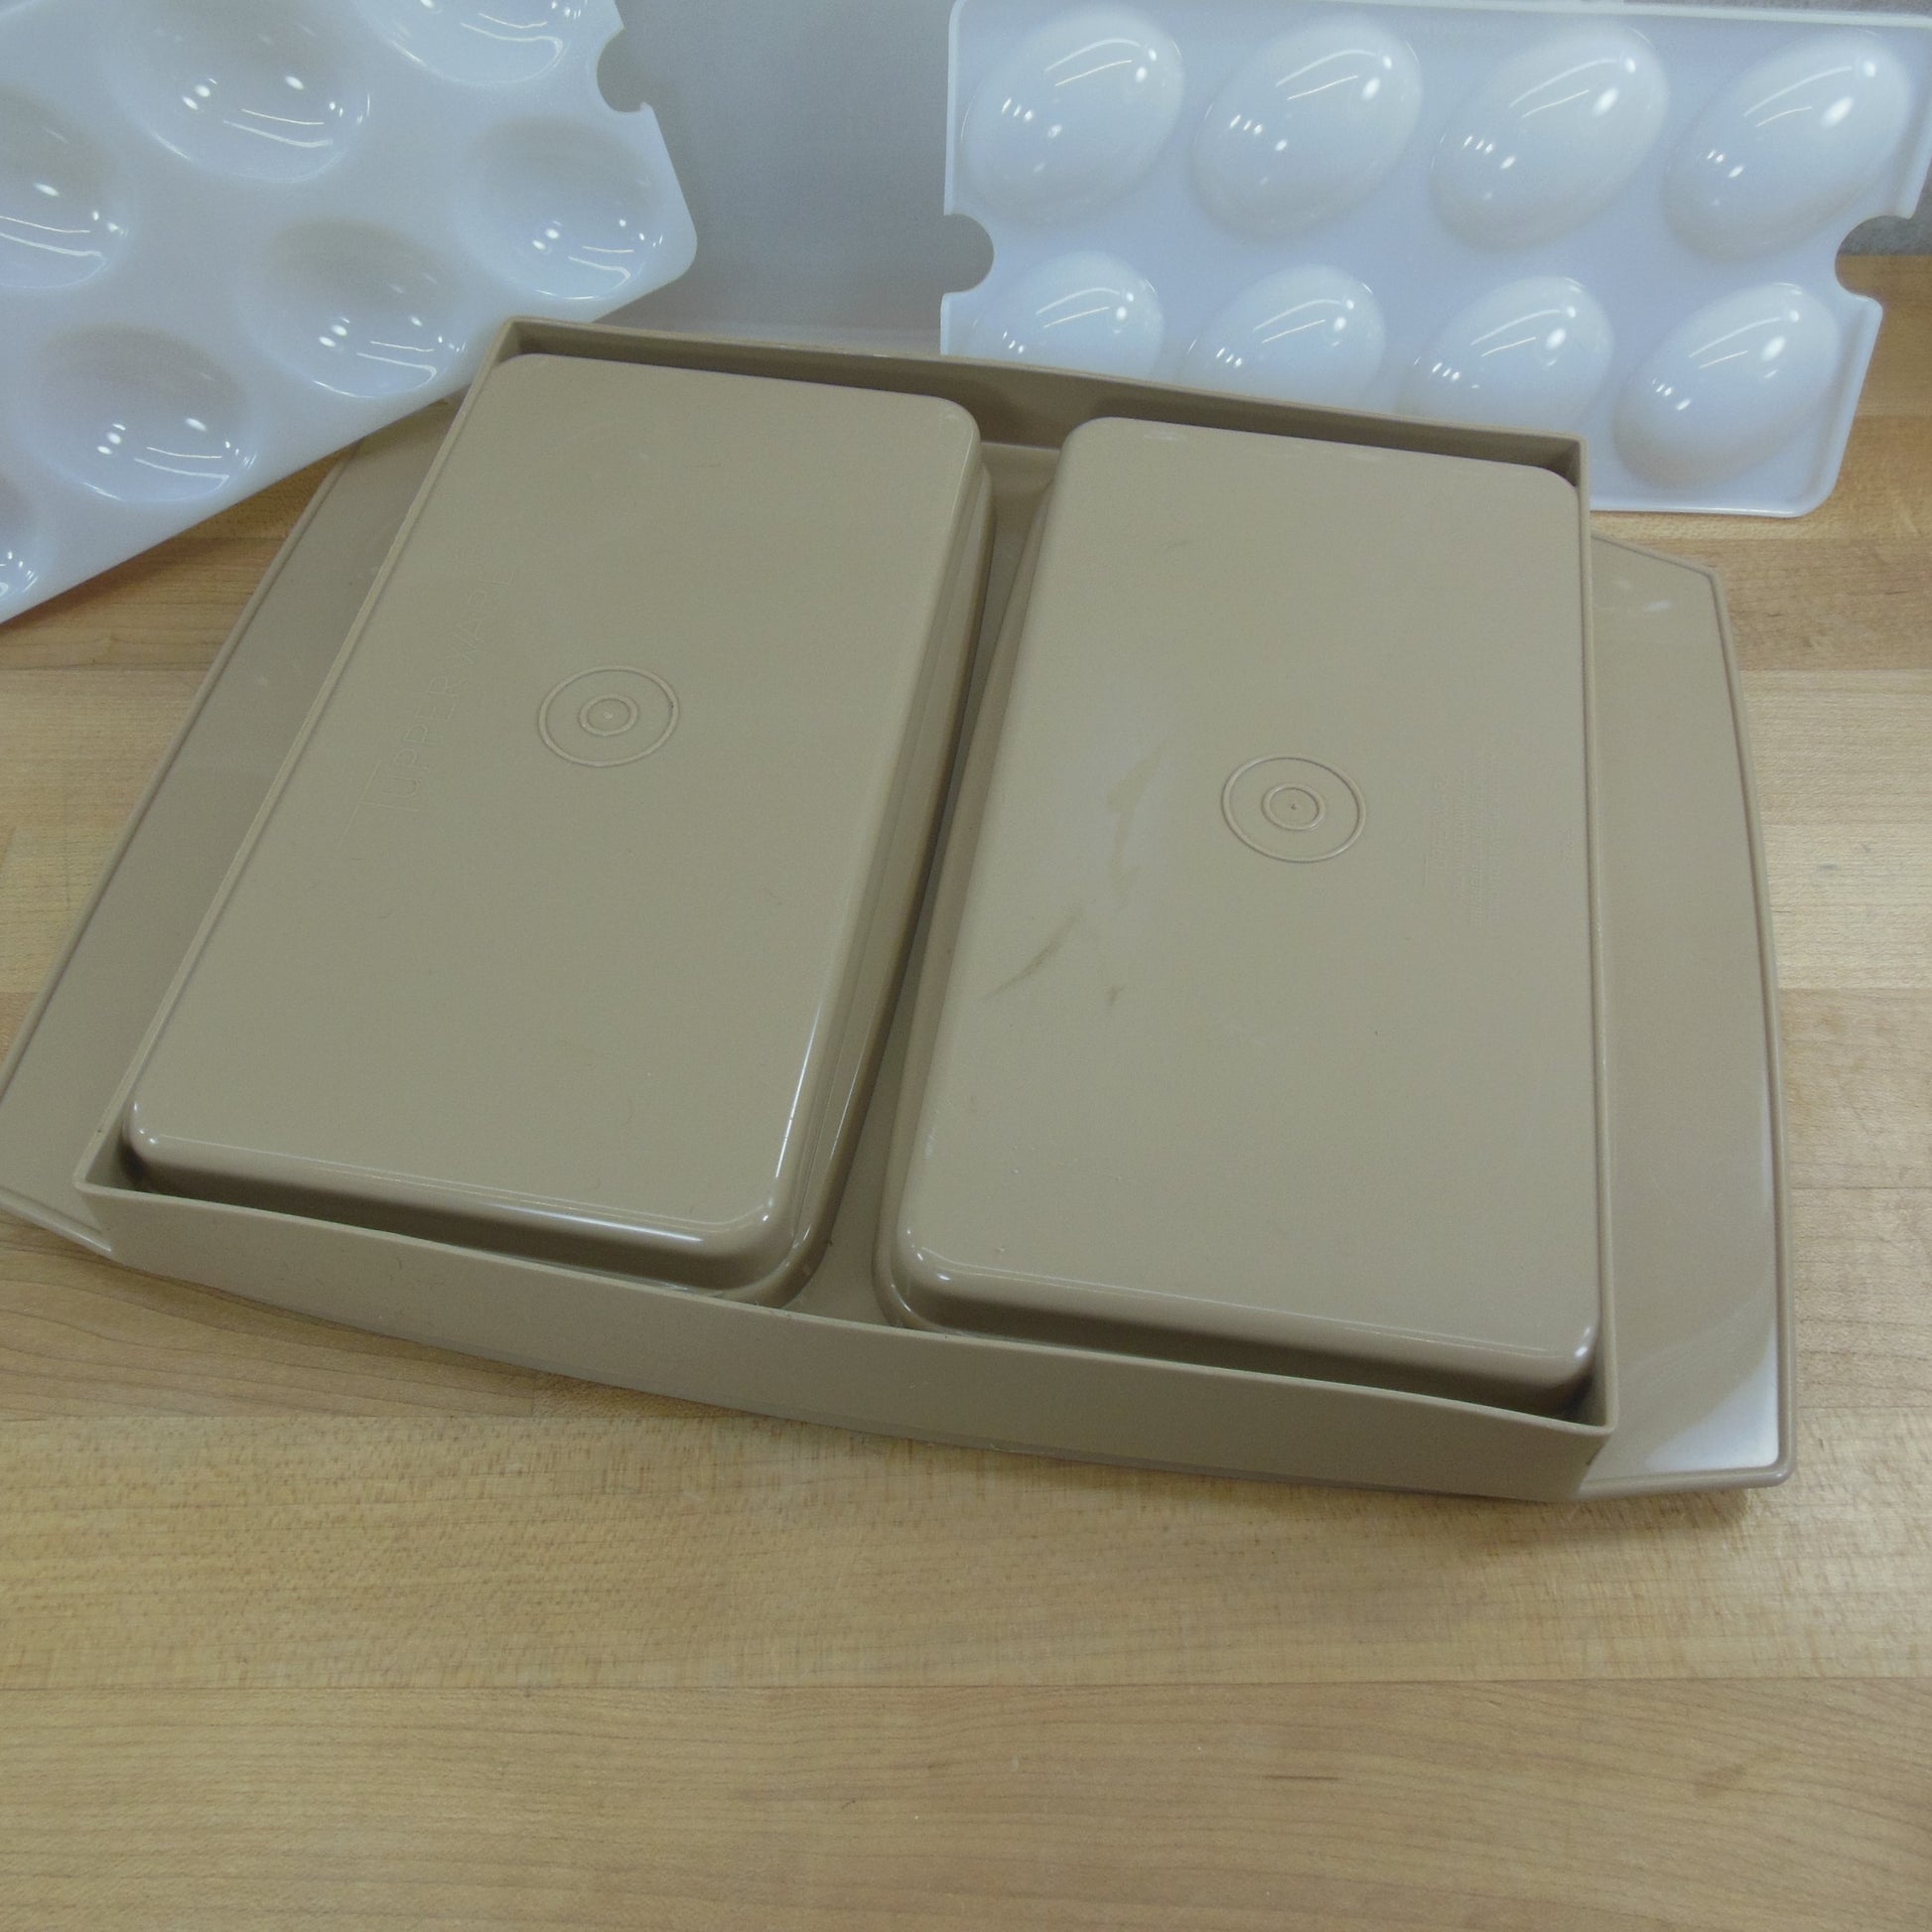 Tupperware Deviled Egg Keeper Container 723-2 Tan Brown 16 Halves Used